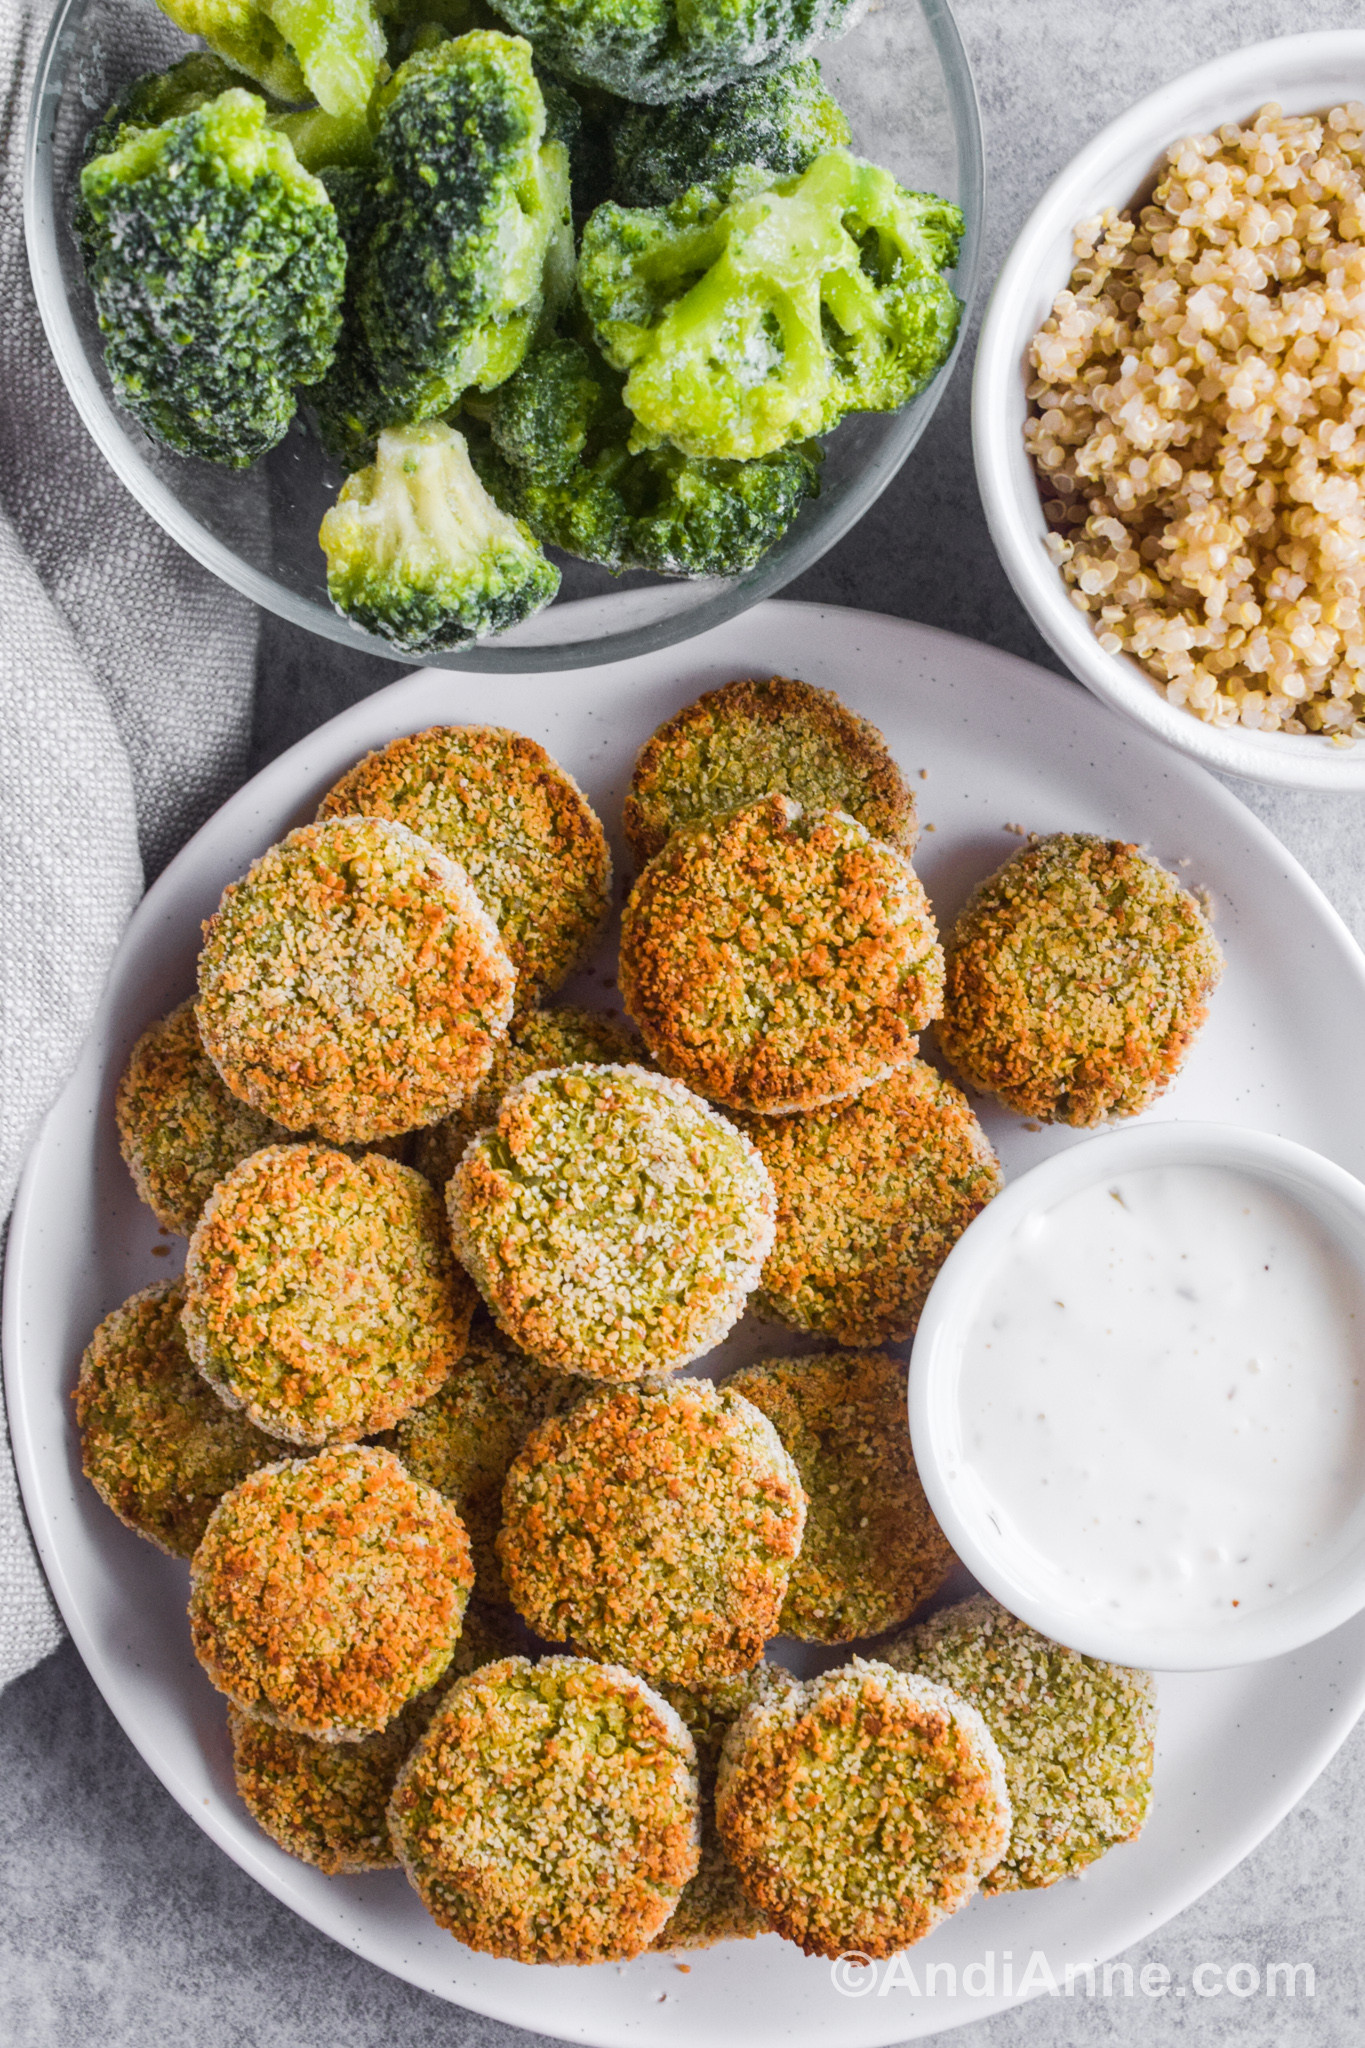 A plate of nuggets with a small bowl with ranch dressing. Bowls of frozen broccoli and cooked quinoa are beside the plate.